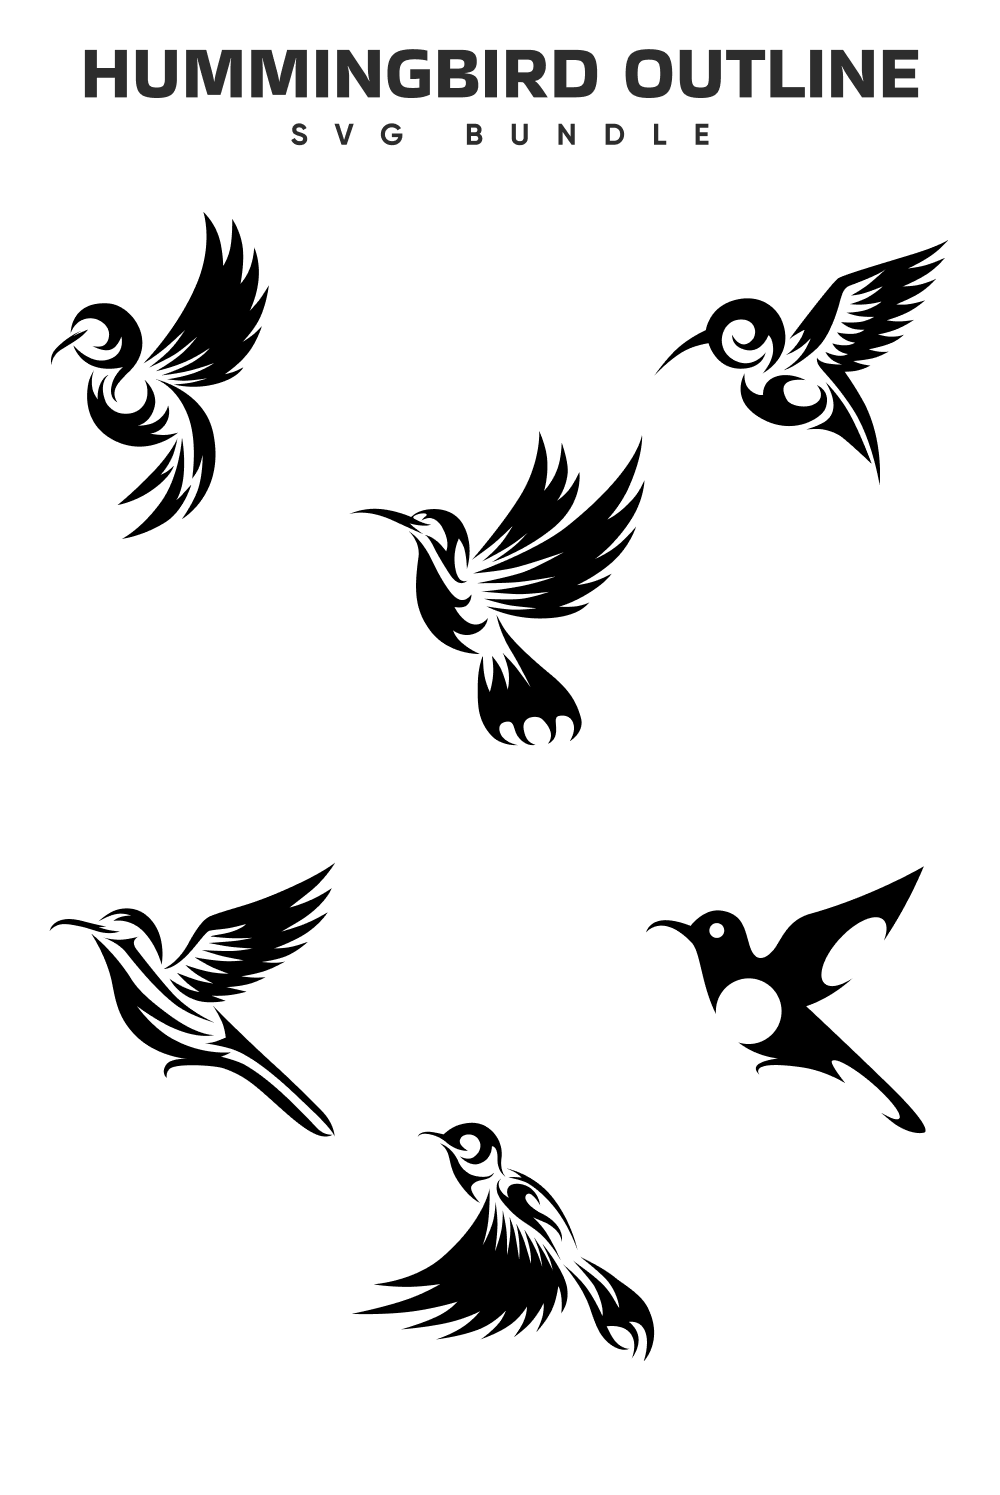 Set of four birds flying in the air.